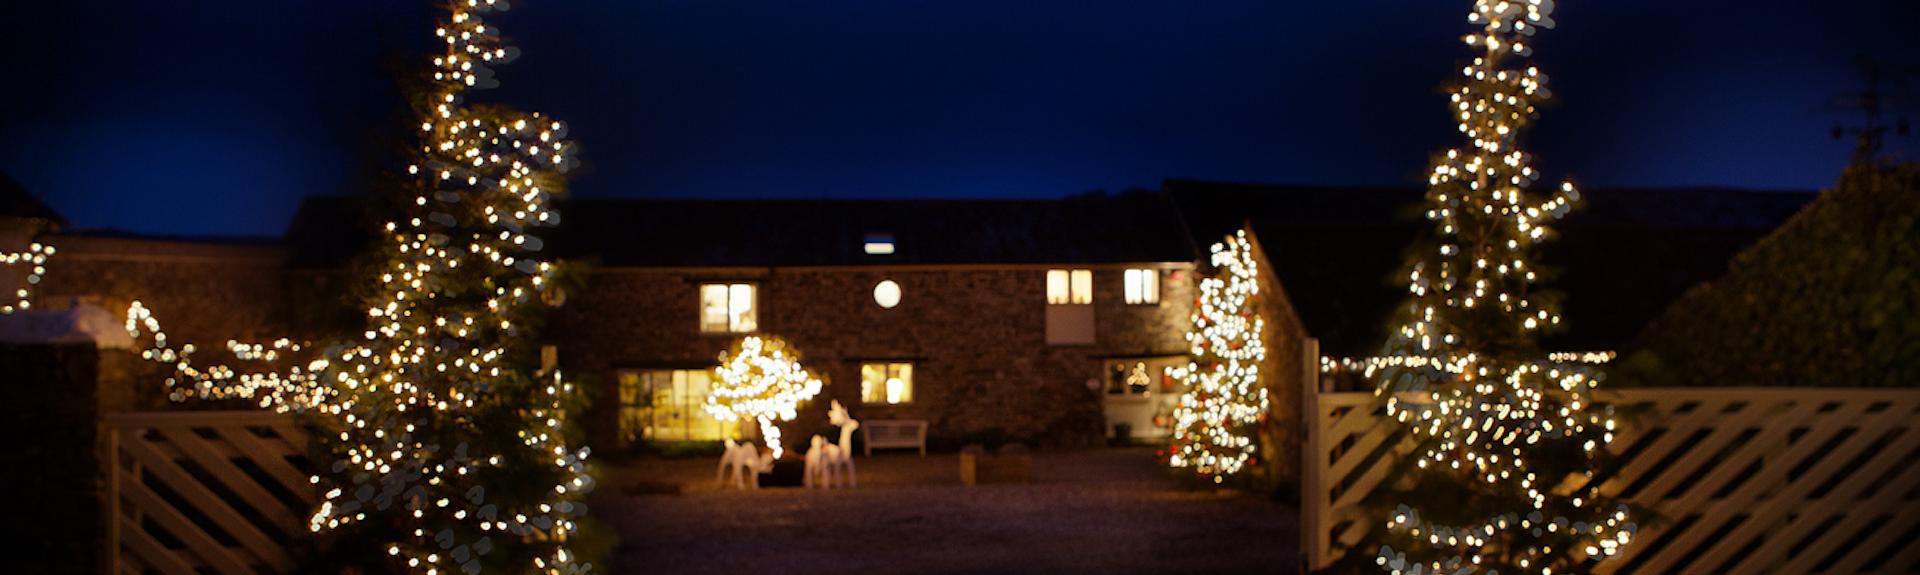 Christmas Trees welcome guests to Parkgate Cottages in North Devon